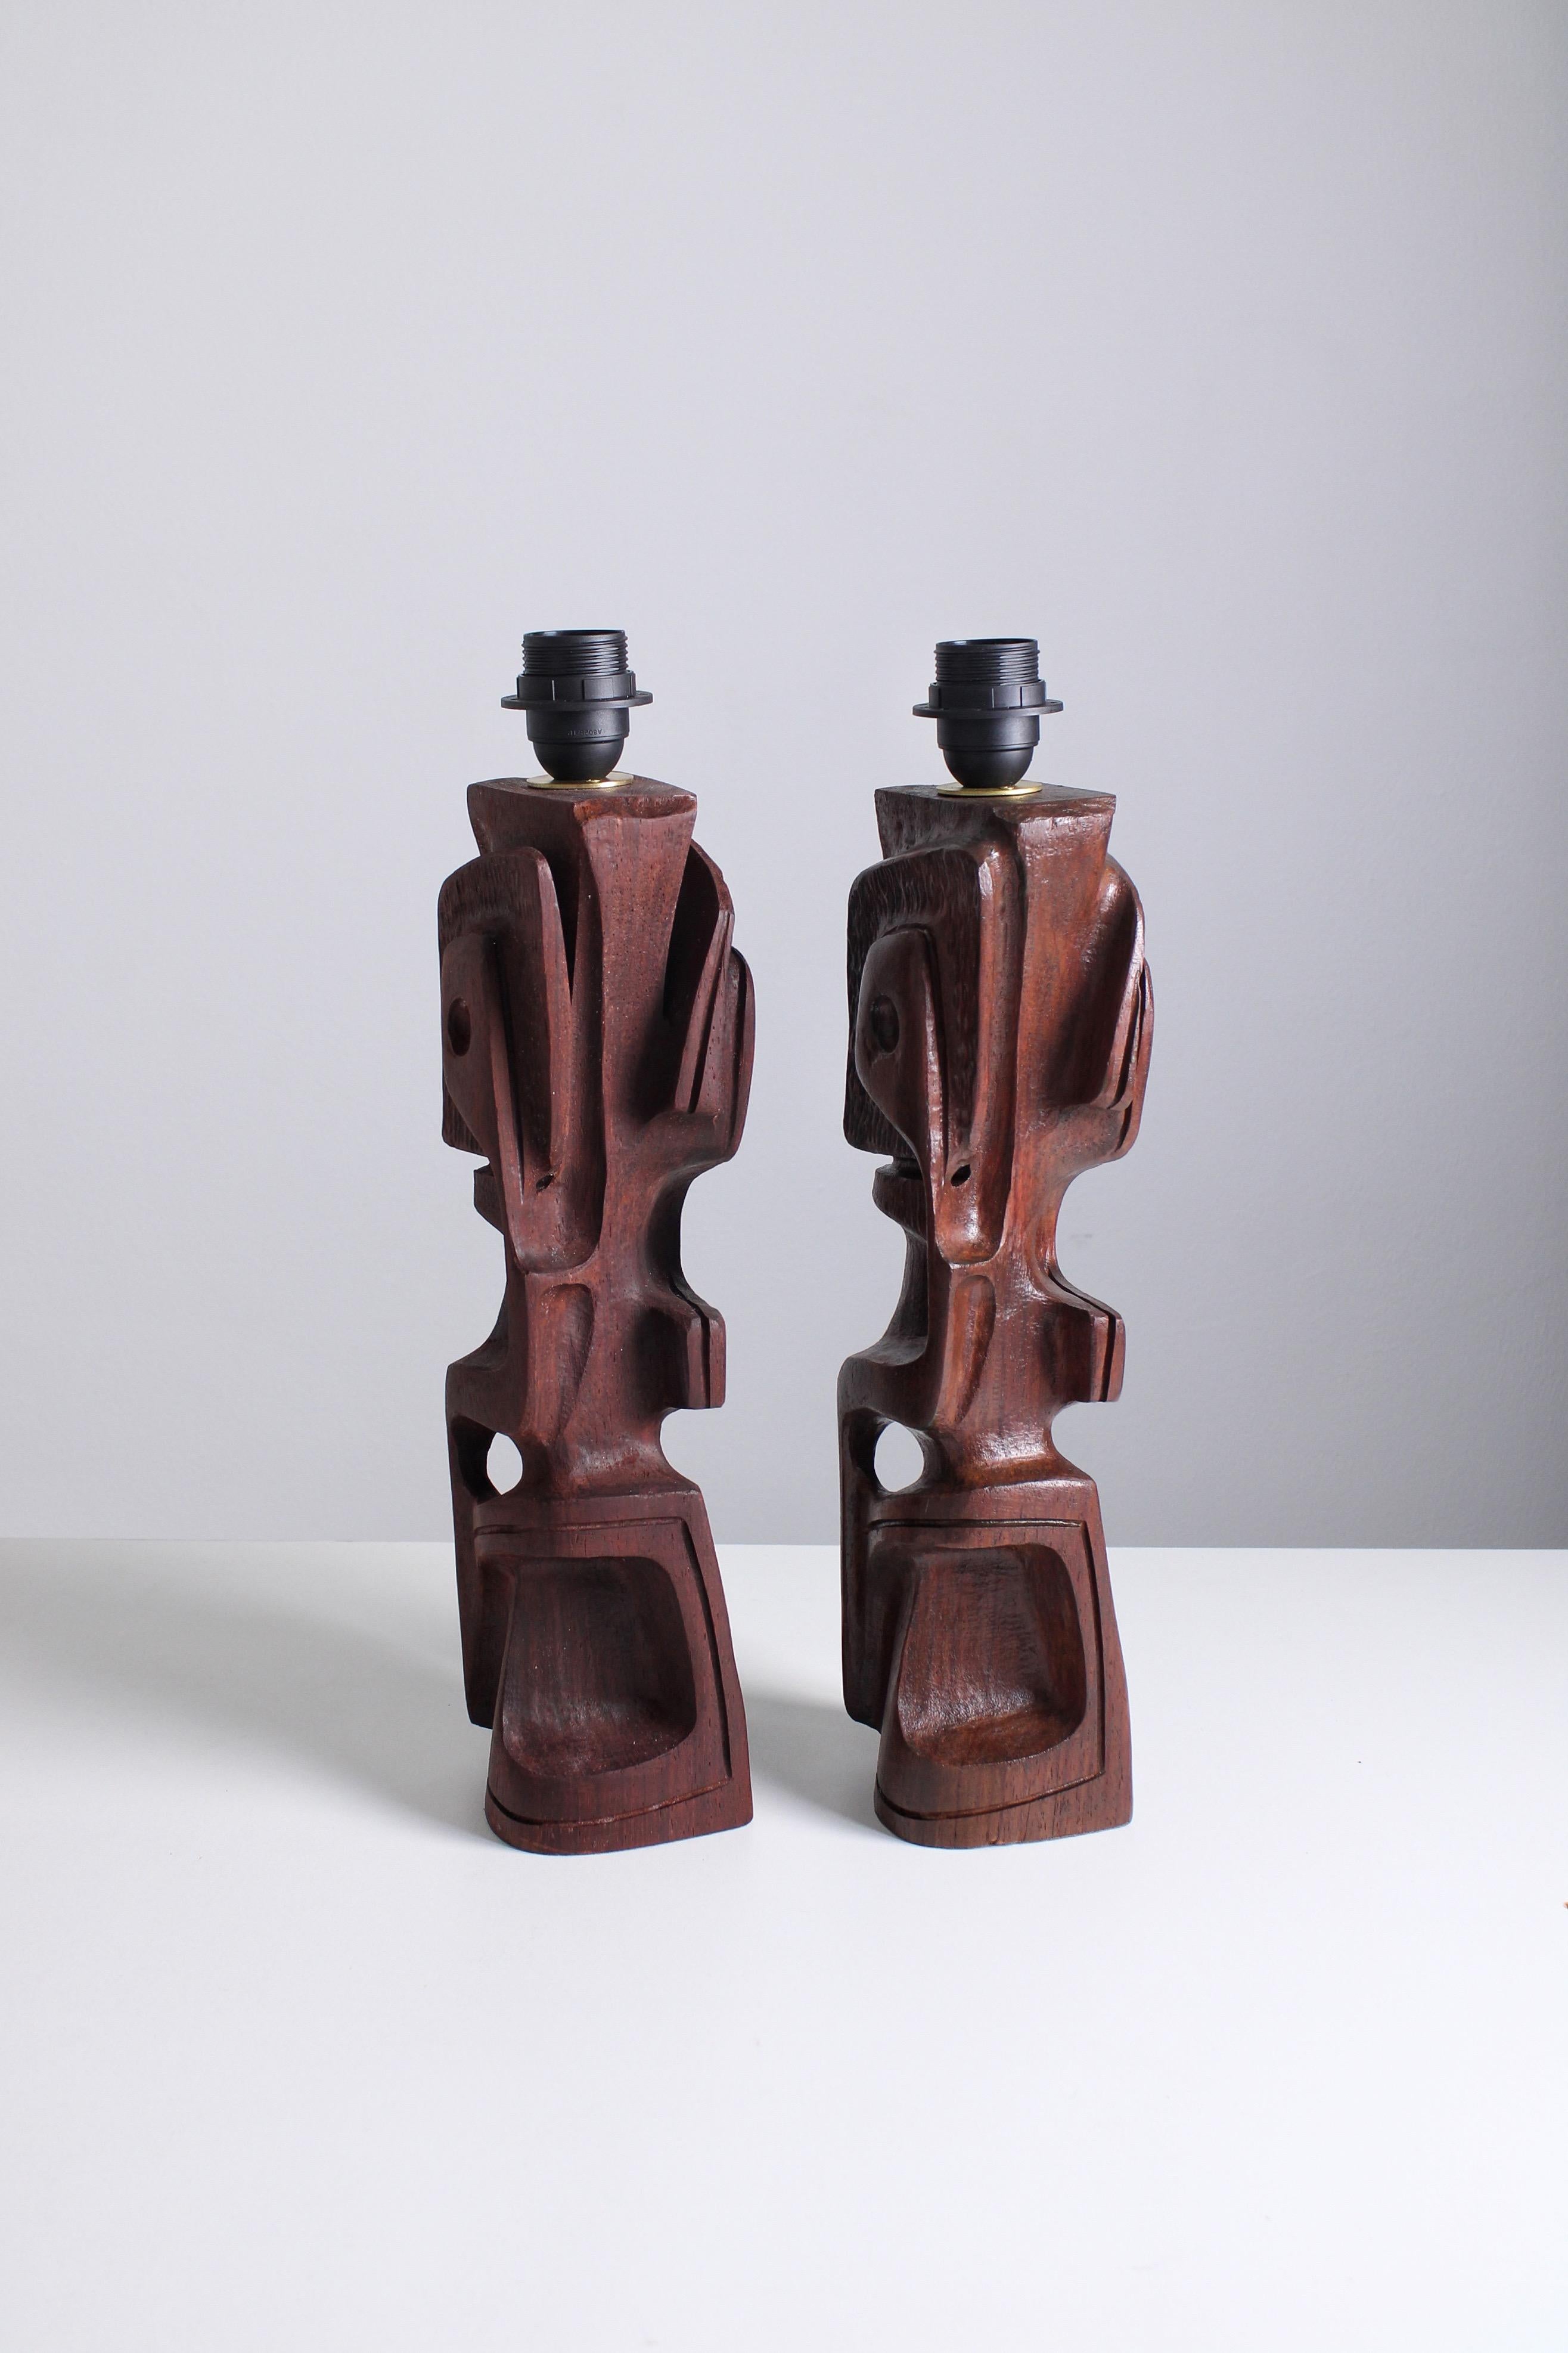 Pair of sculptural table lamps in Padouk wood by Gianni Pinna, 1970s For Sale 4